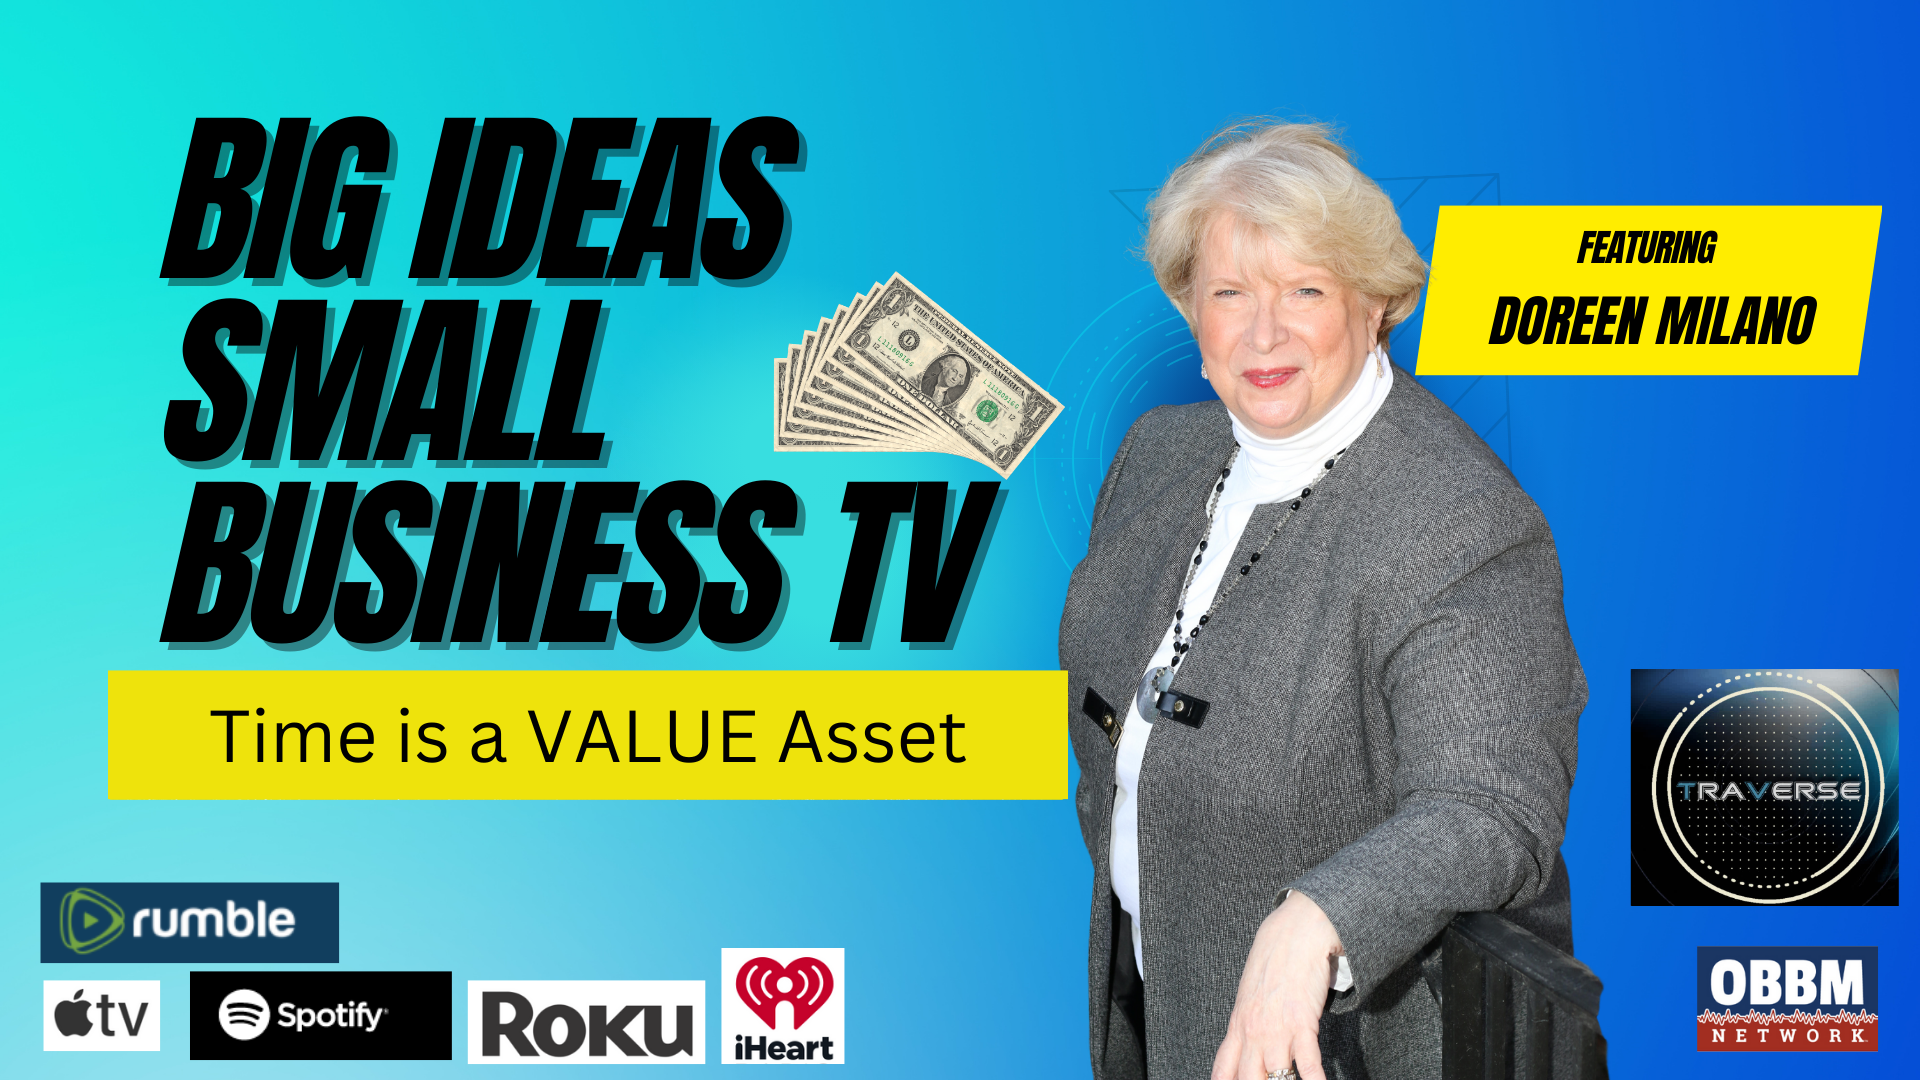 BISB30-Time is a Value Asset Big Ideas, Small Business TV